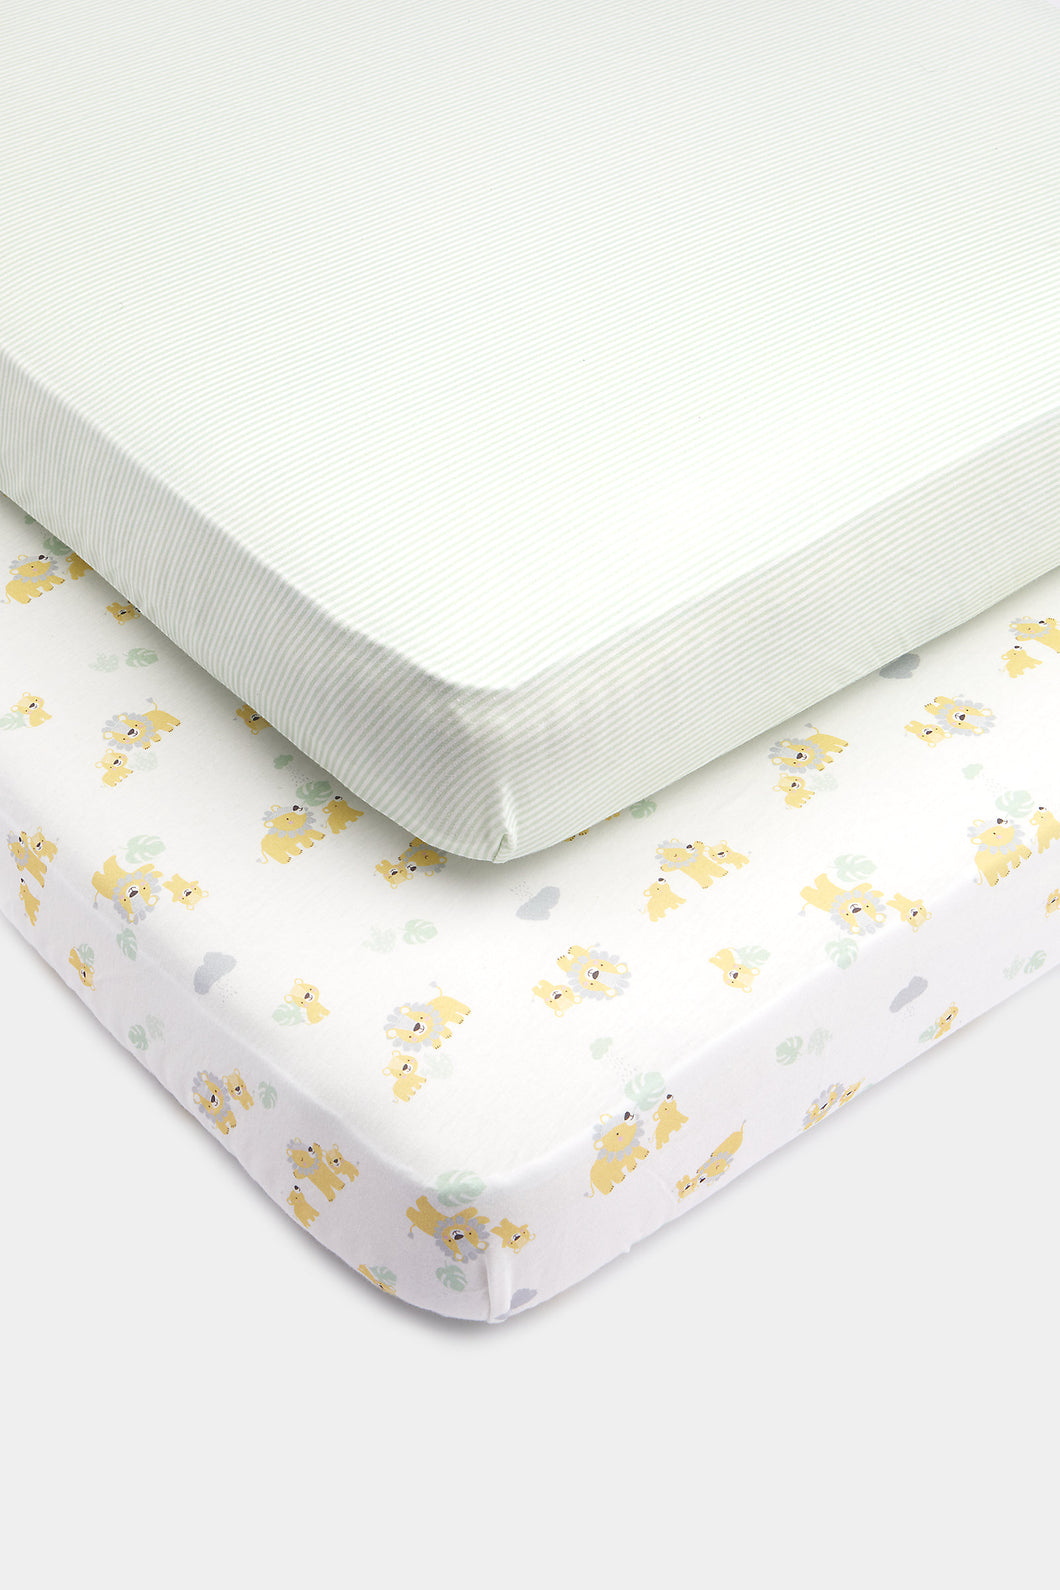 Mothercare Lion Fitted Cot Bed Sheets - 2 Pack